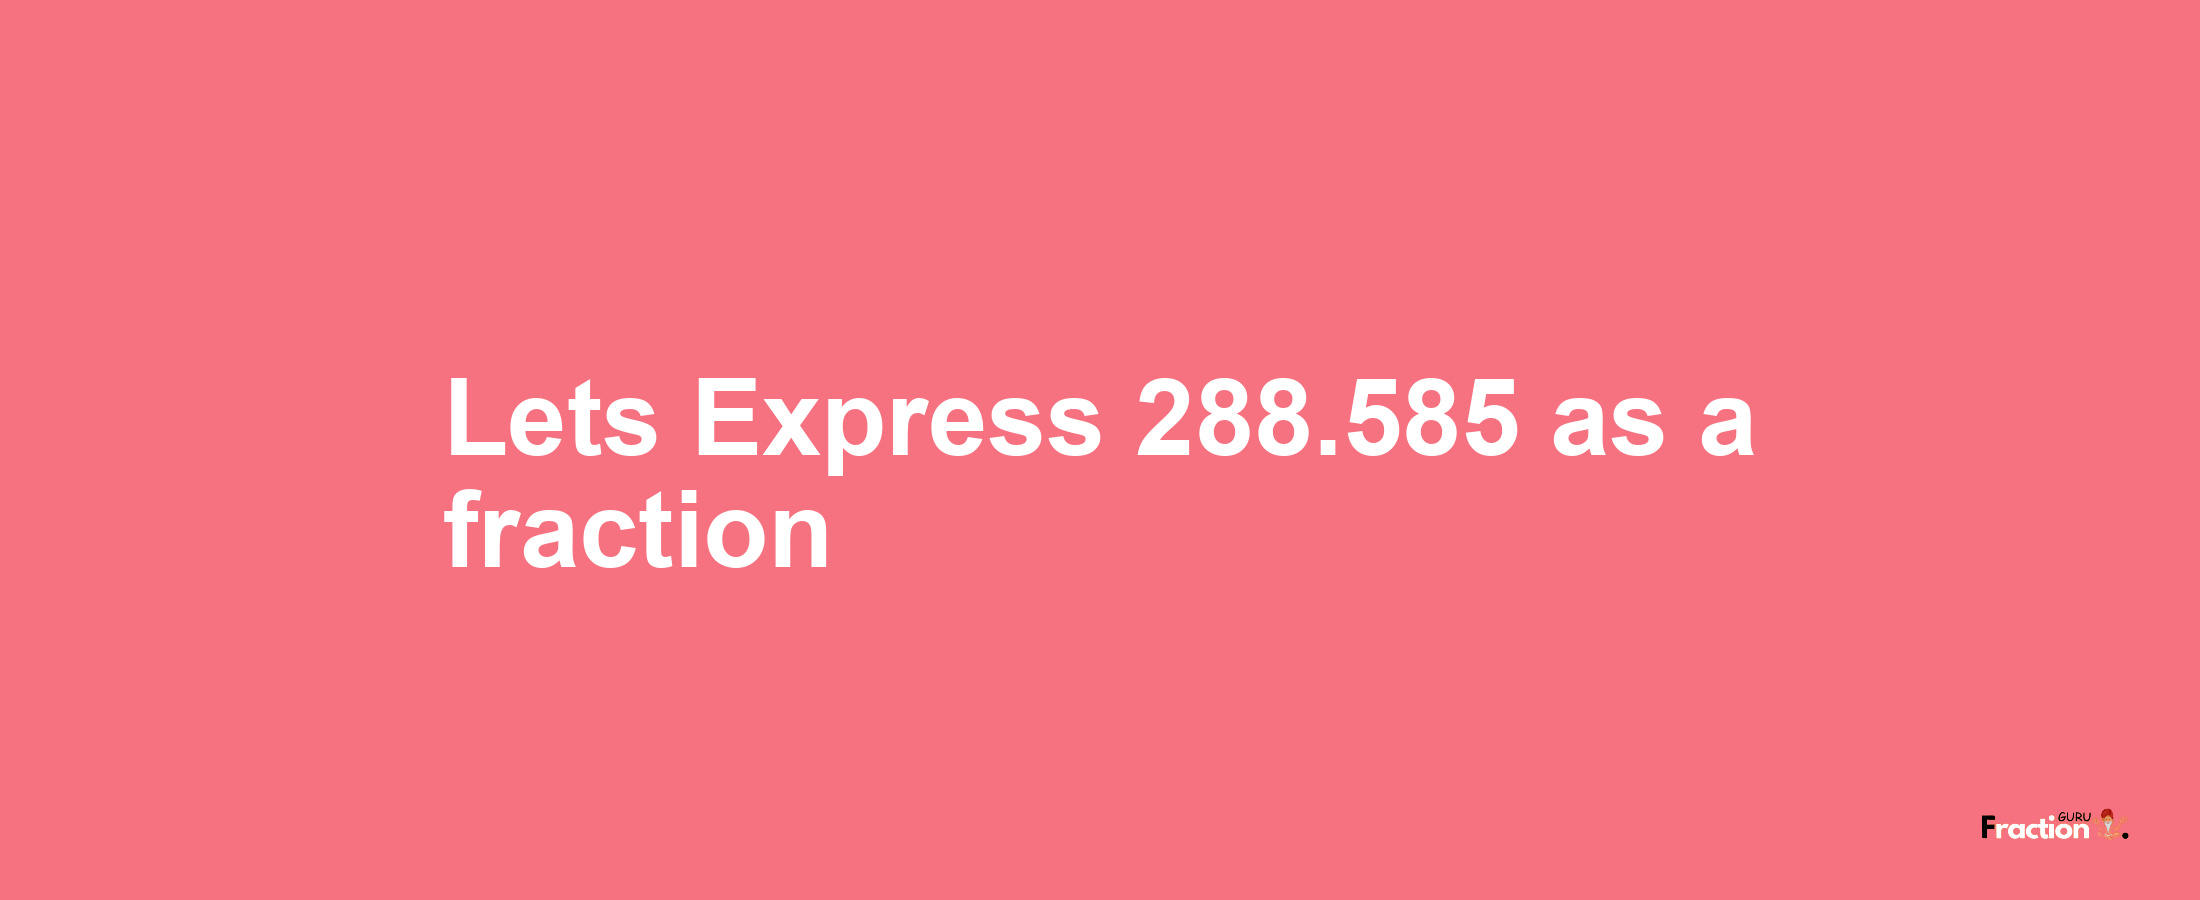 Lets Express 288.585 as afraction